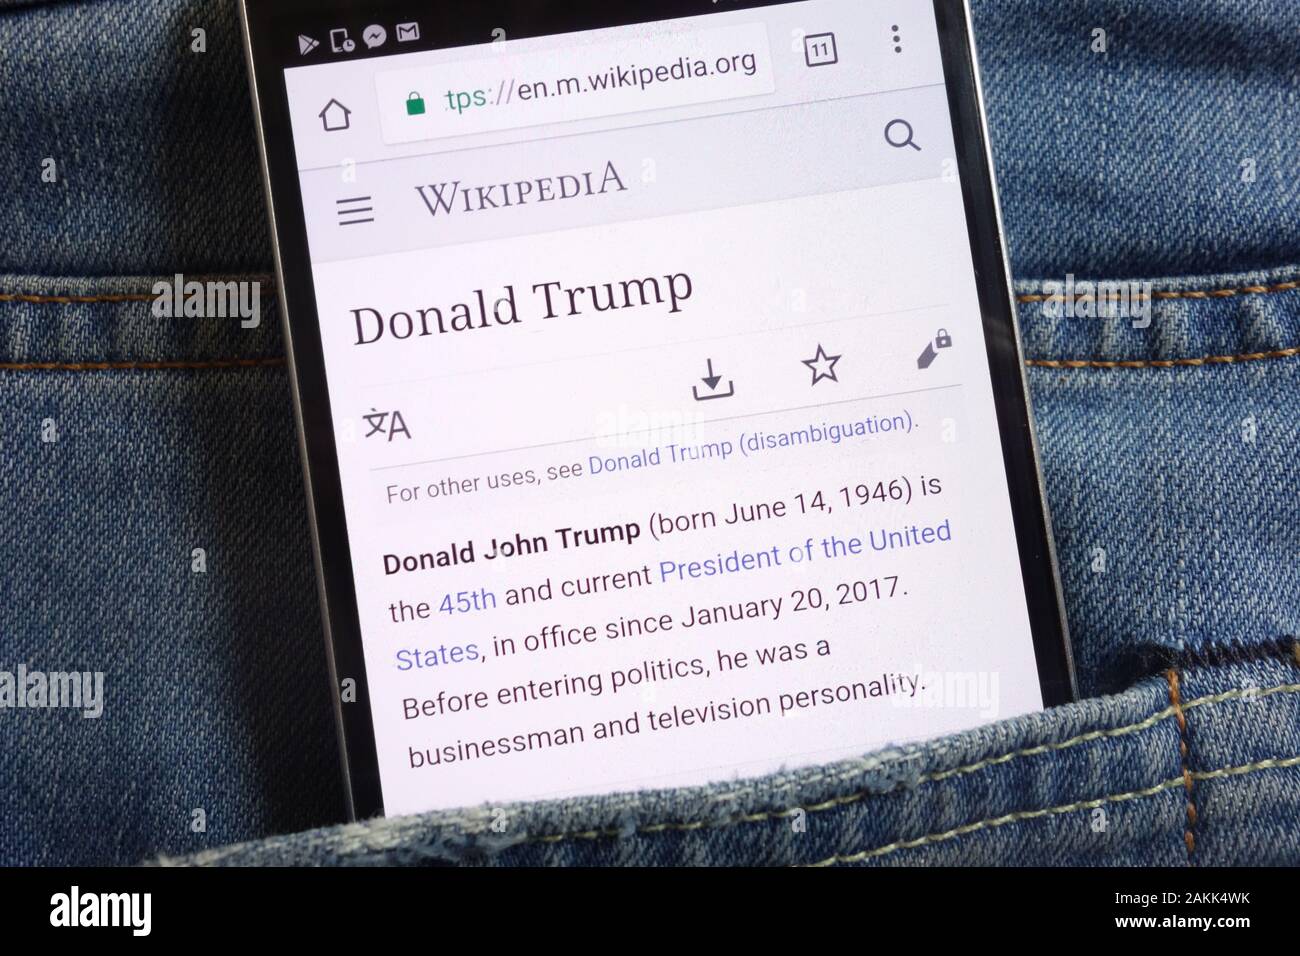 Informations about Donald Trump on Wikipedia website displayed on smartphone hidden in jeans pocket Stock Photo